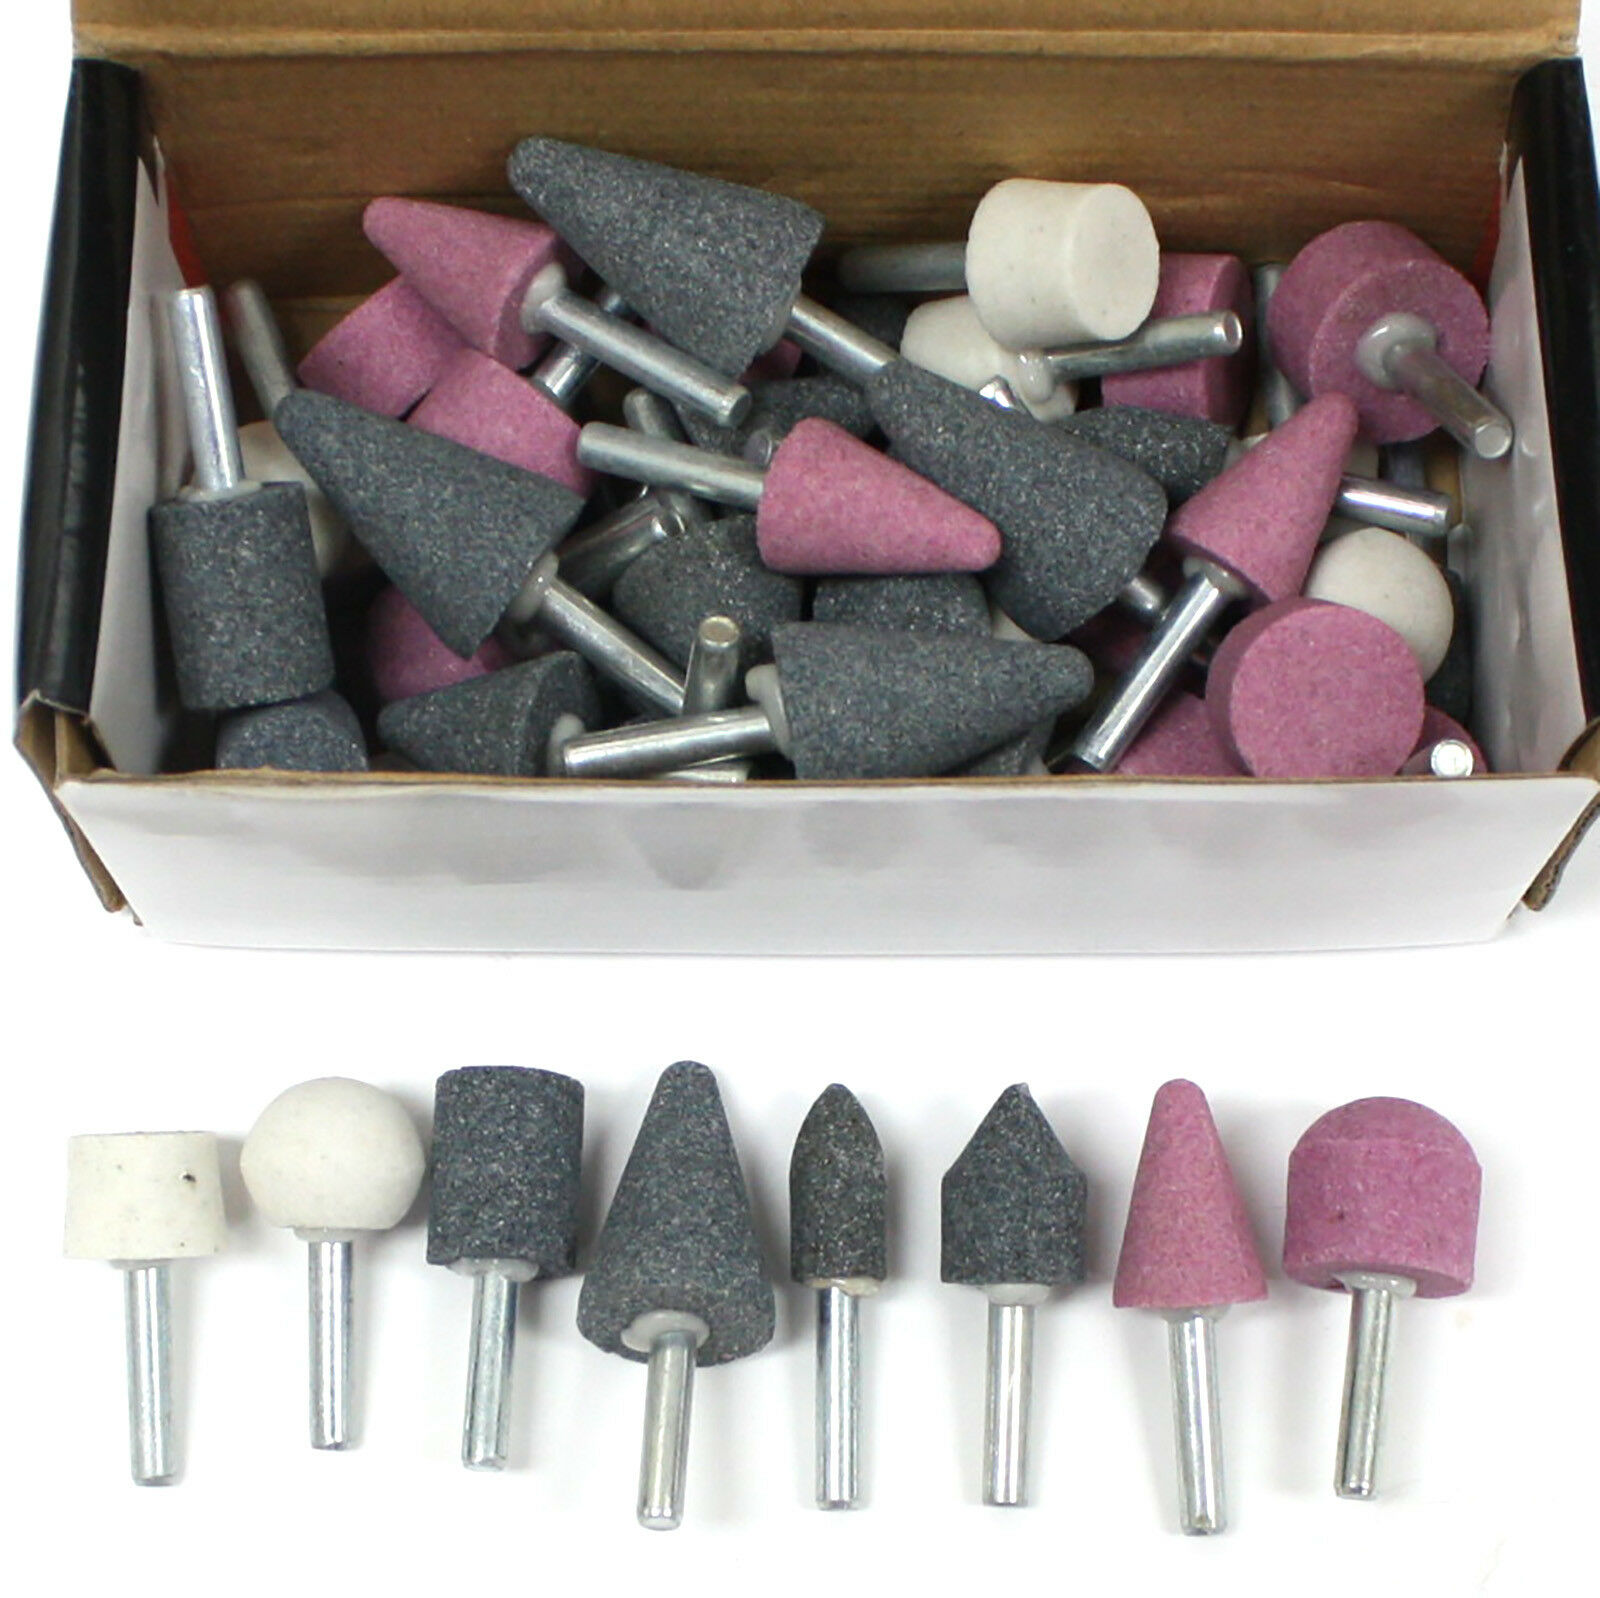 50pc MOUNTED ABRASIVE GRINDING STONES 1/4" SHANK DRILL